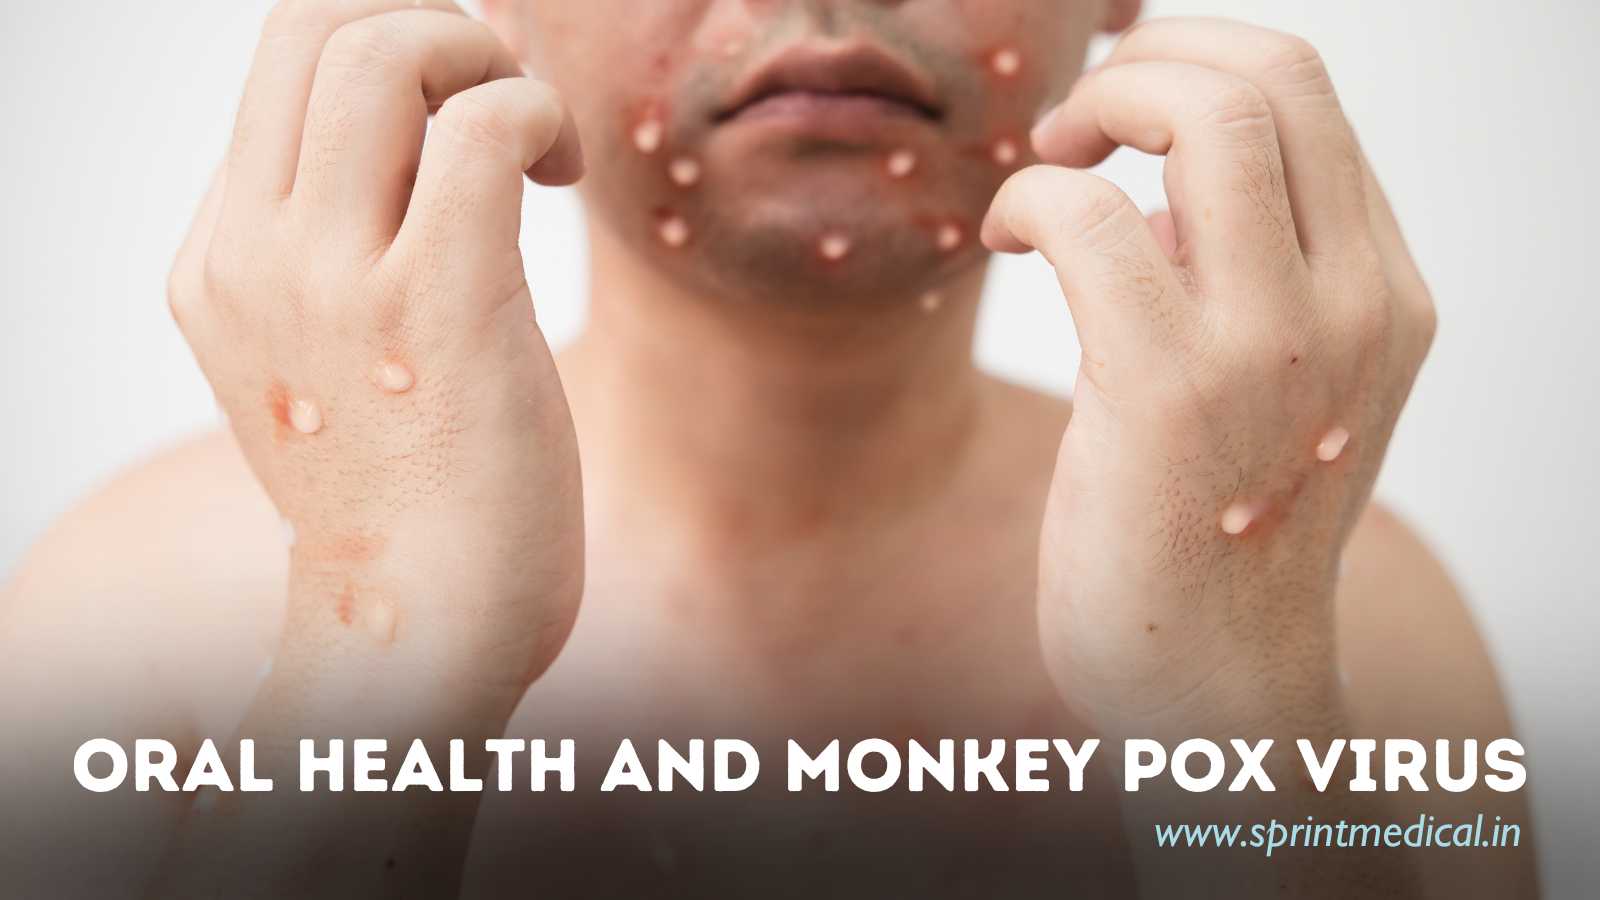 Oral Health and Monkey Pox Virus